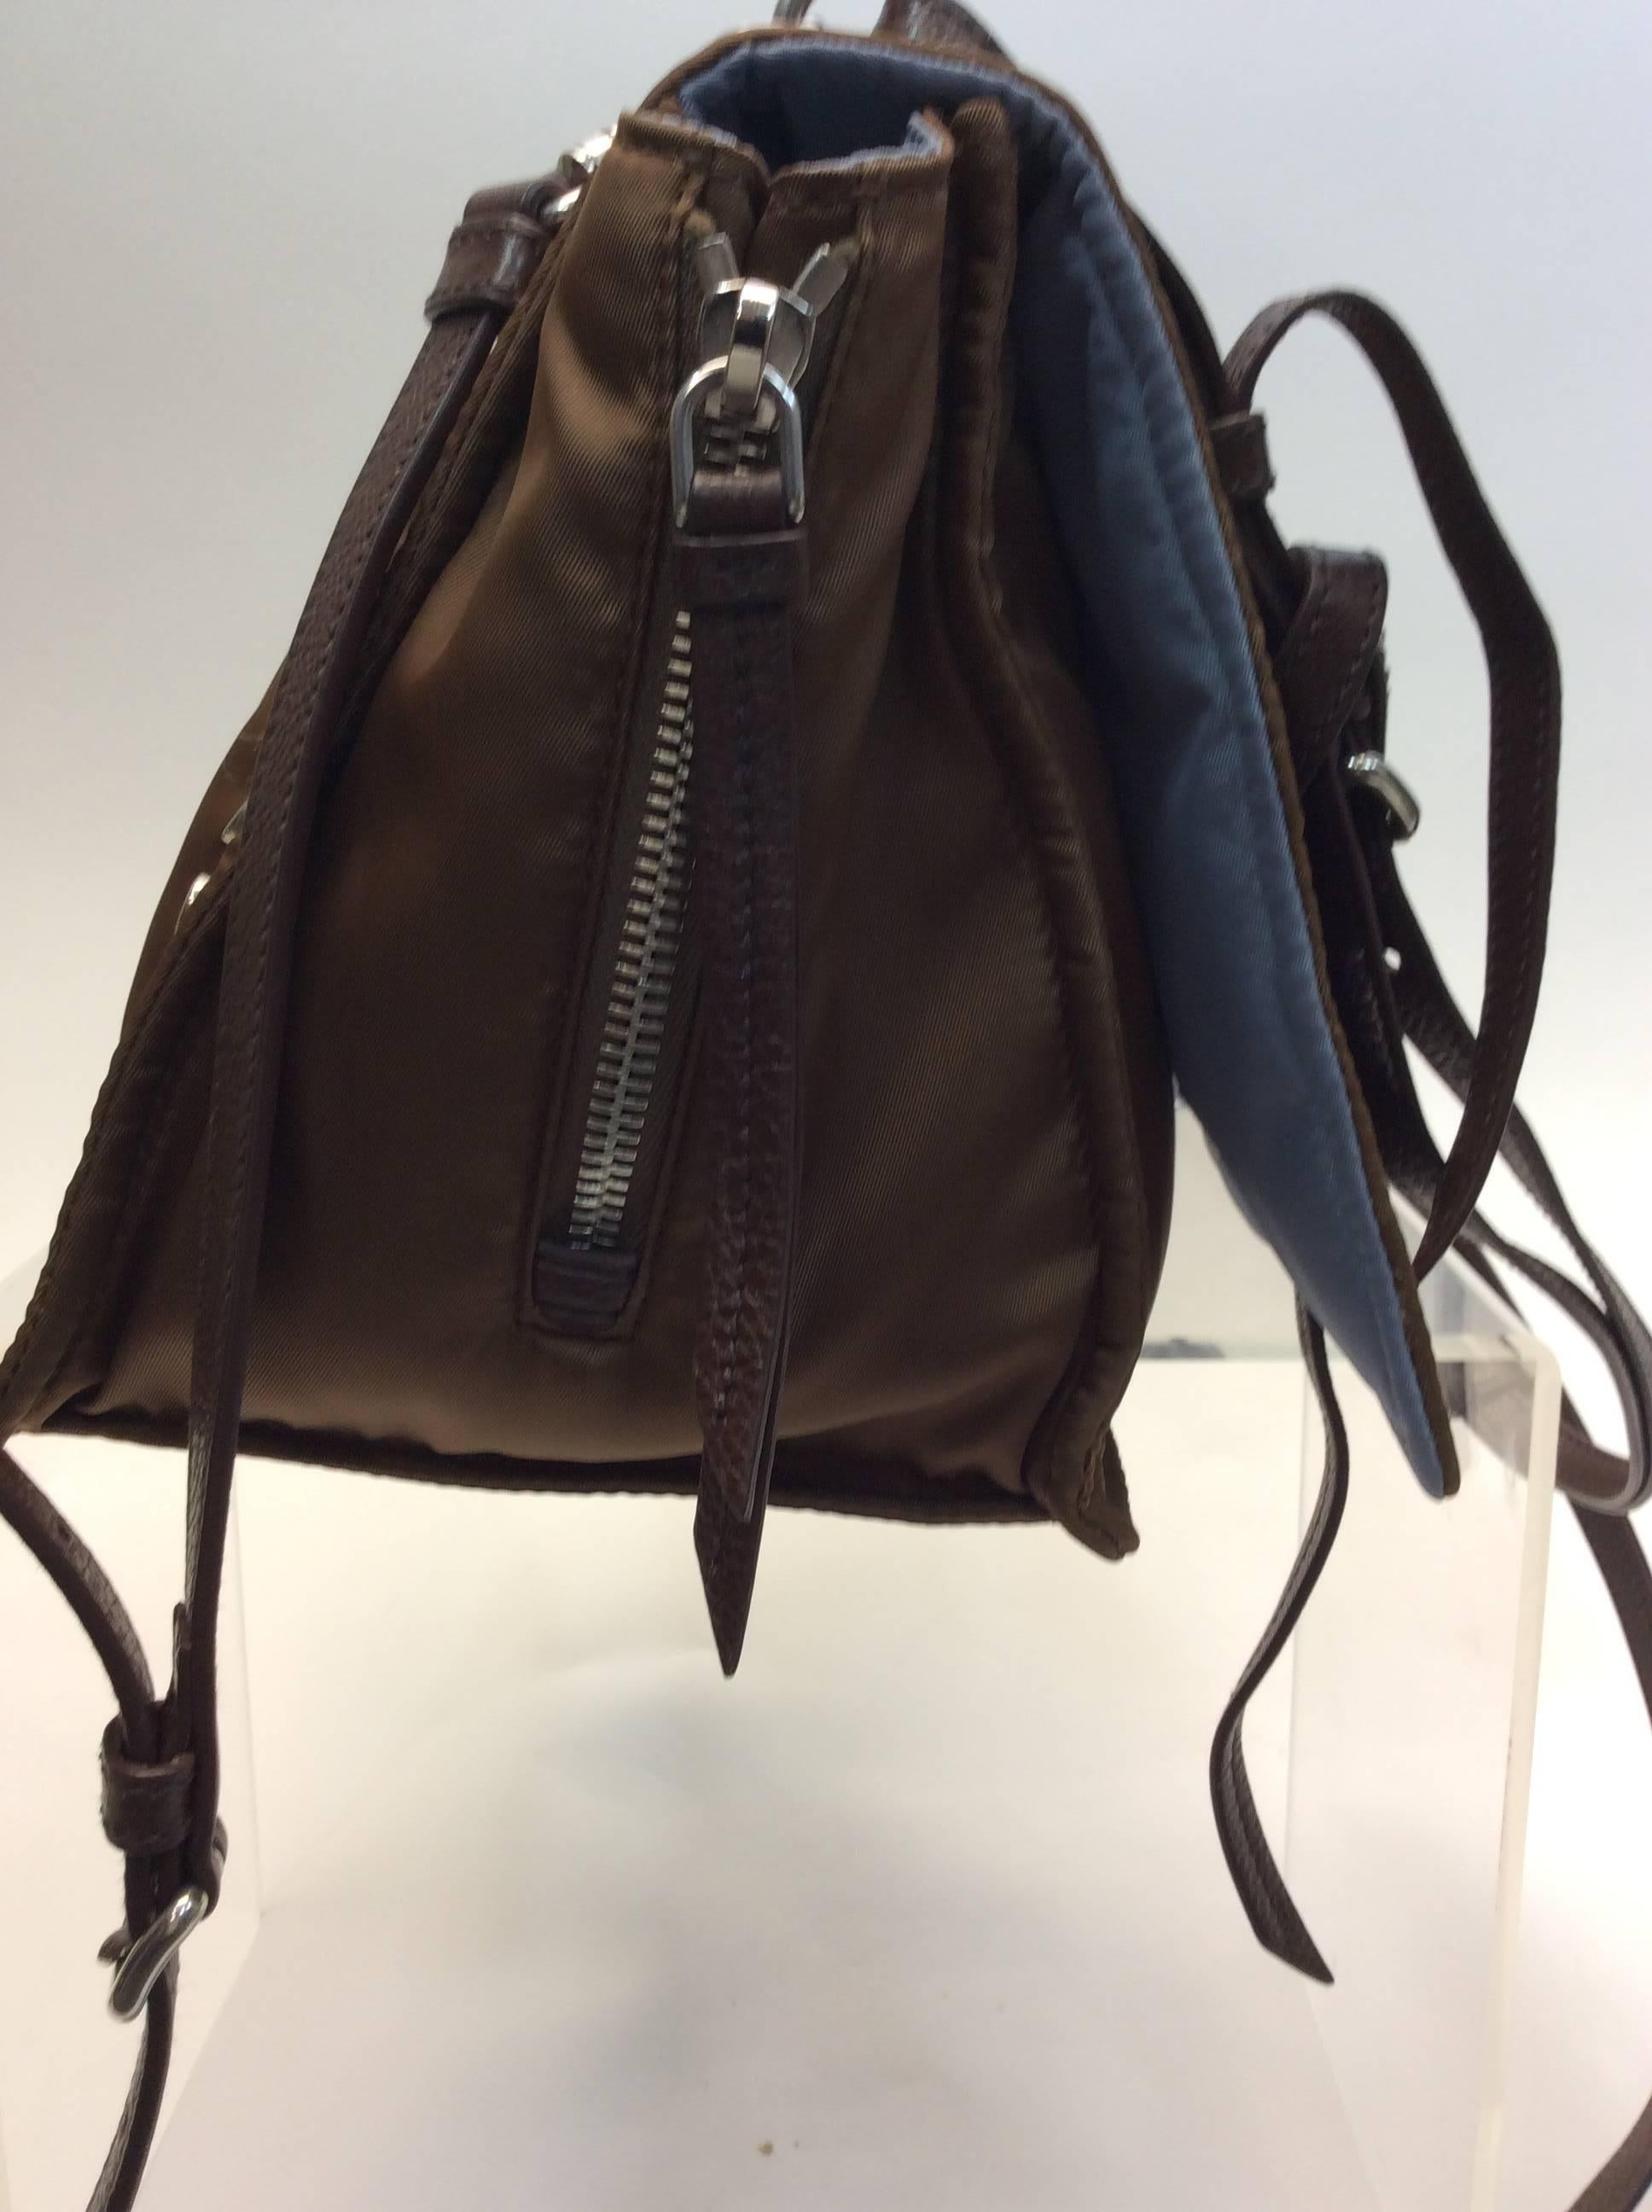 Prada NWT Brown Nylon With Rivets Crossbody
$1400
Leather crossbody strap with nylon body
Brand new with tags and authenticity cards
